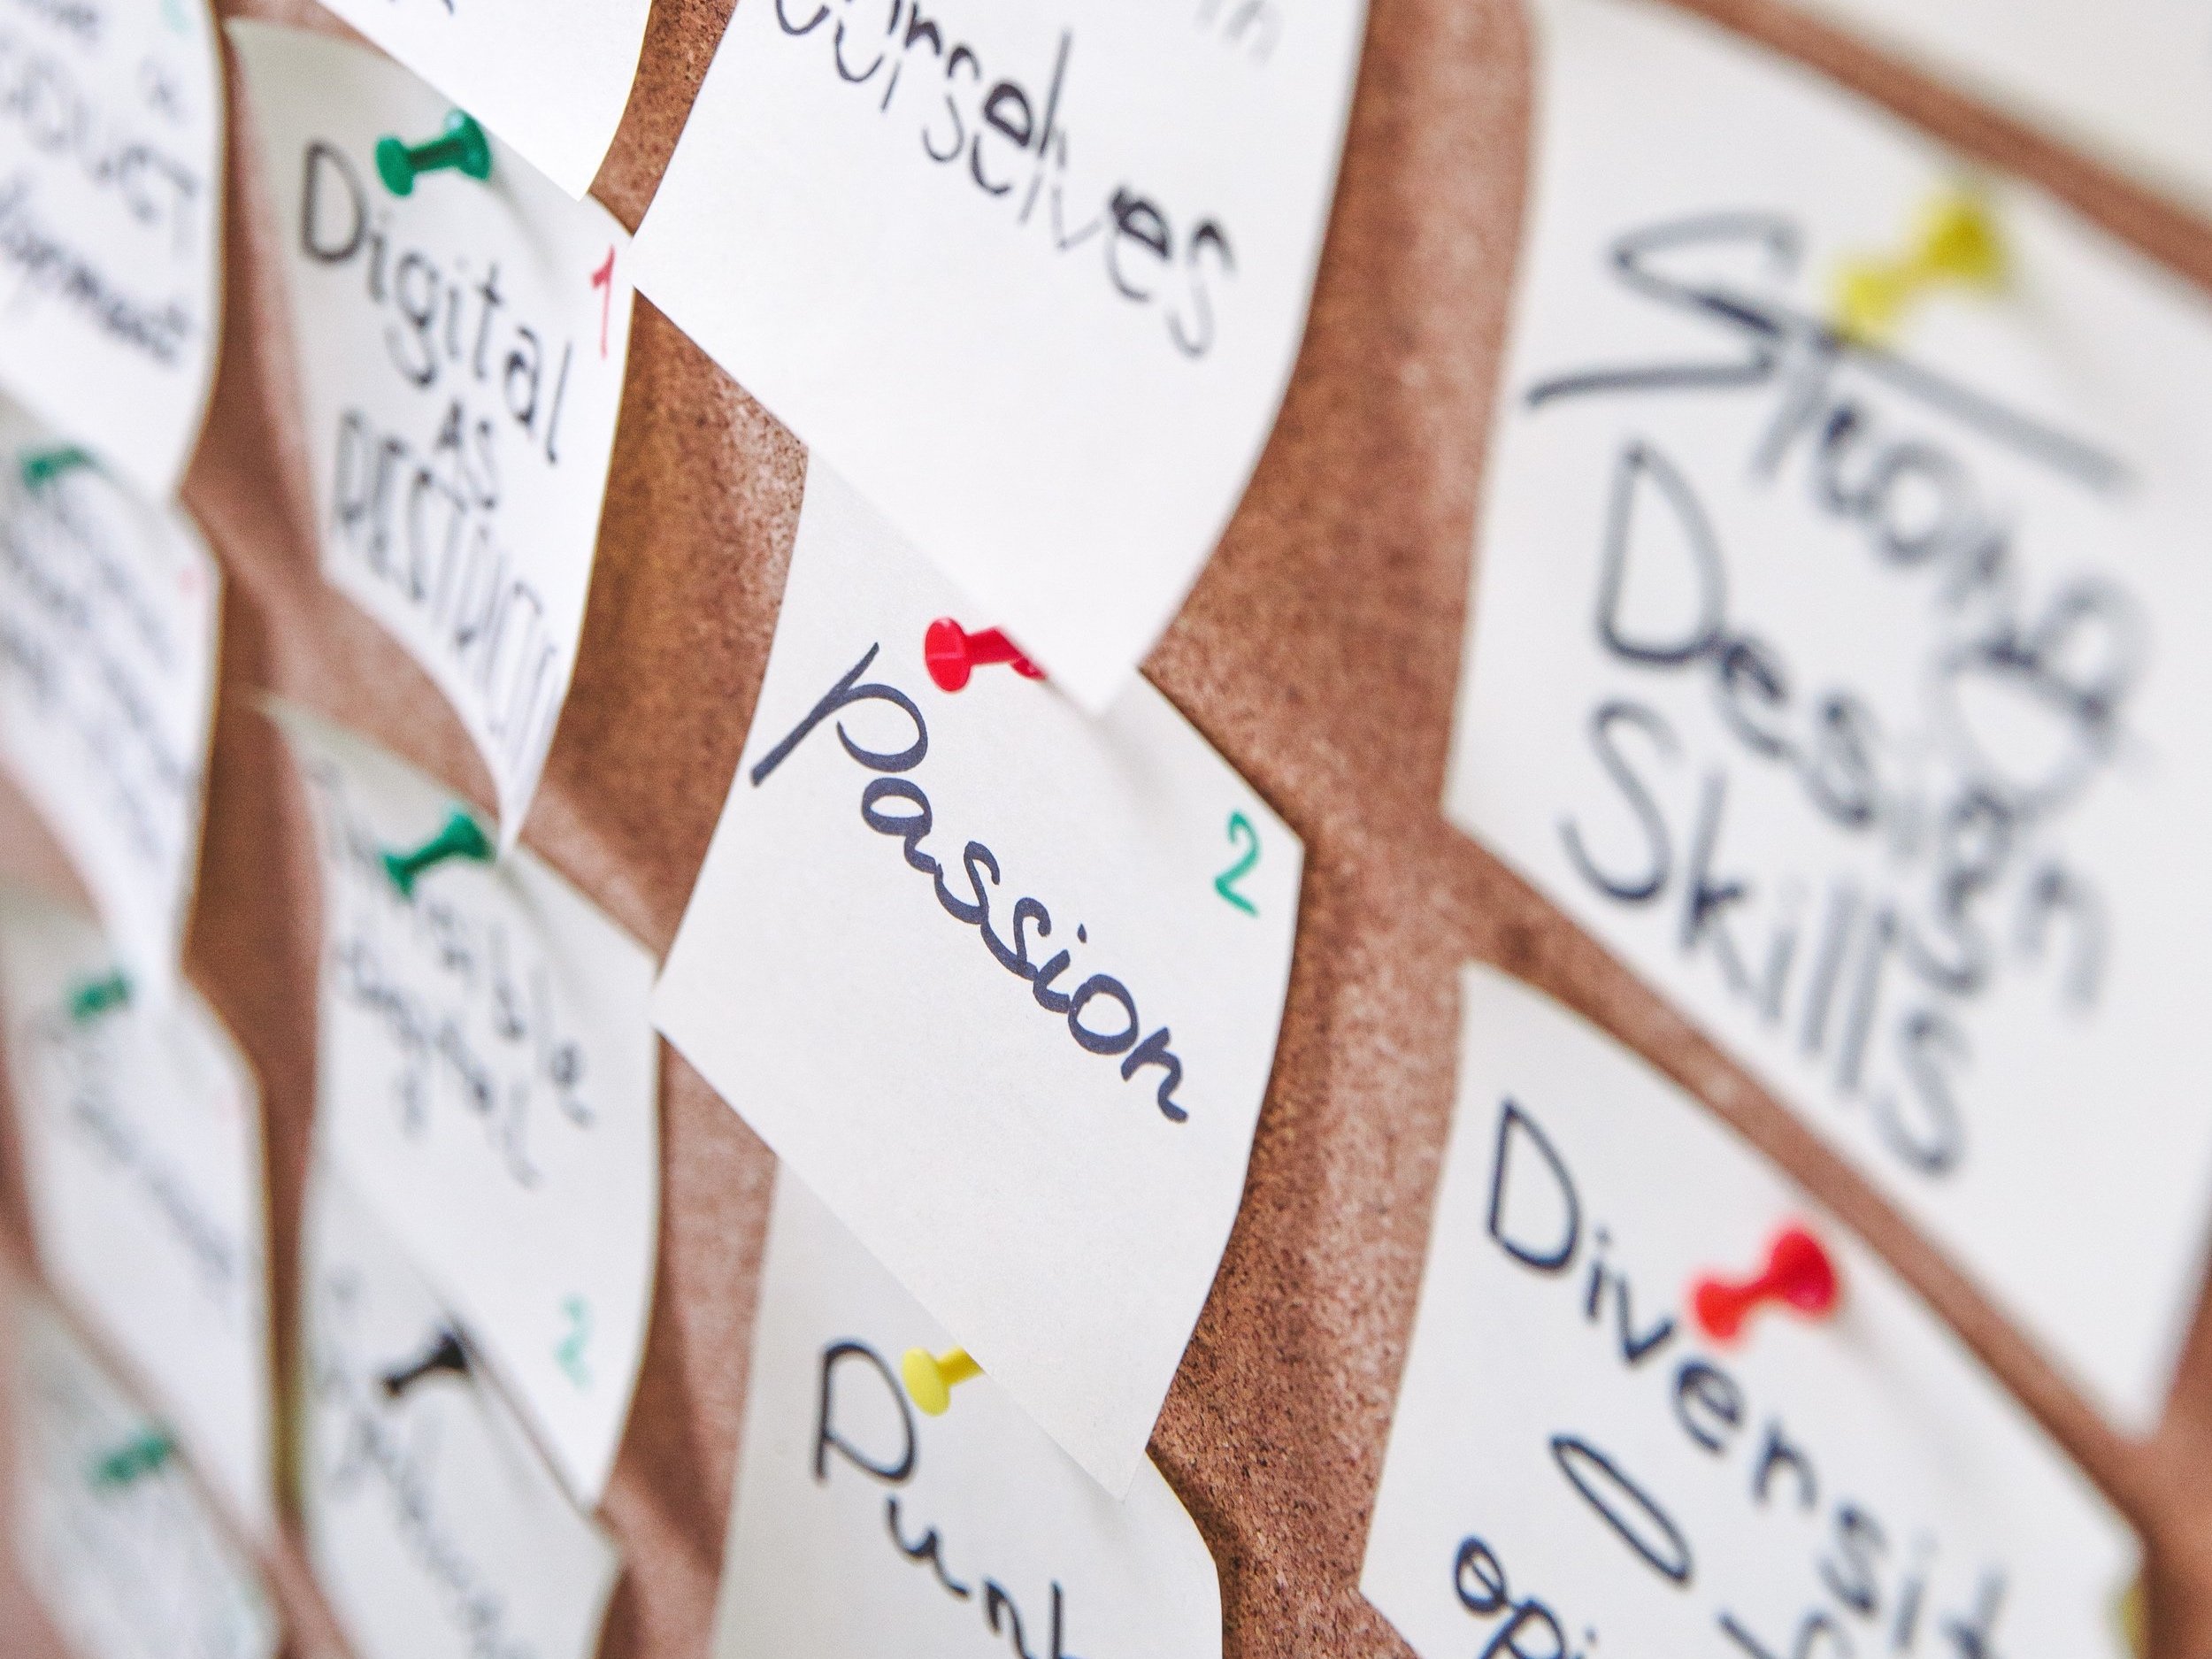 There are numerous sticky notes with various messages on a cork board, but the one with the word "Passion" stands out.